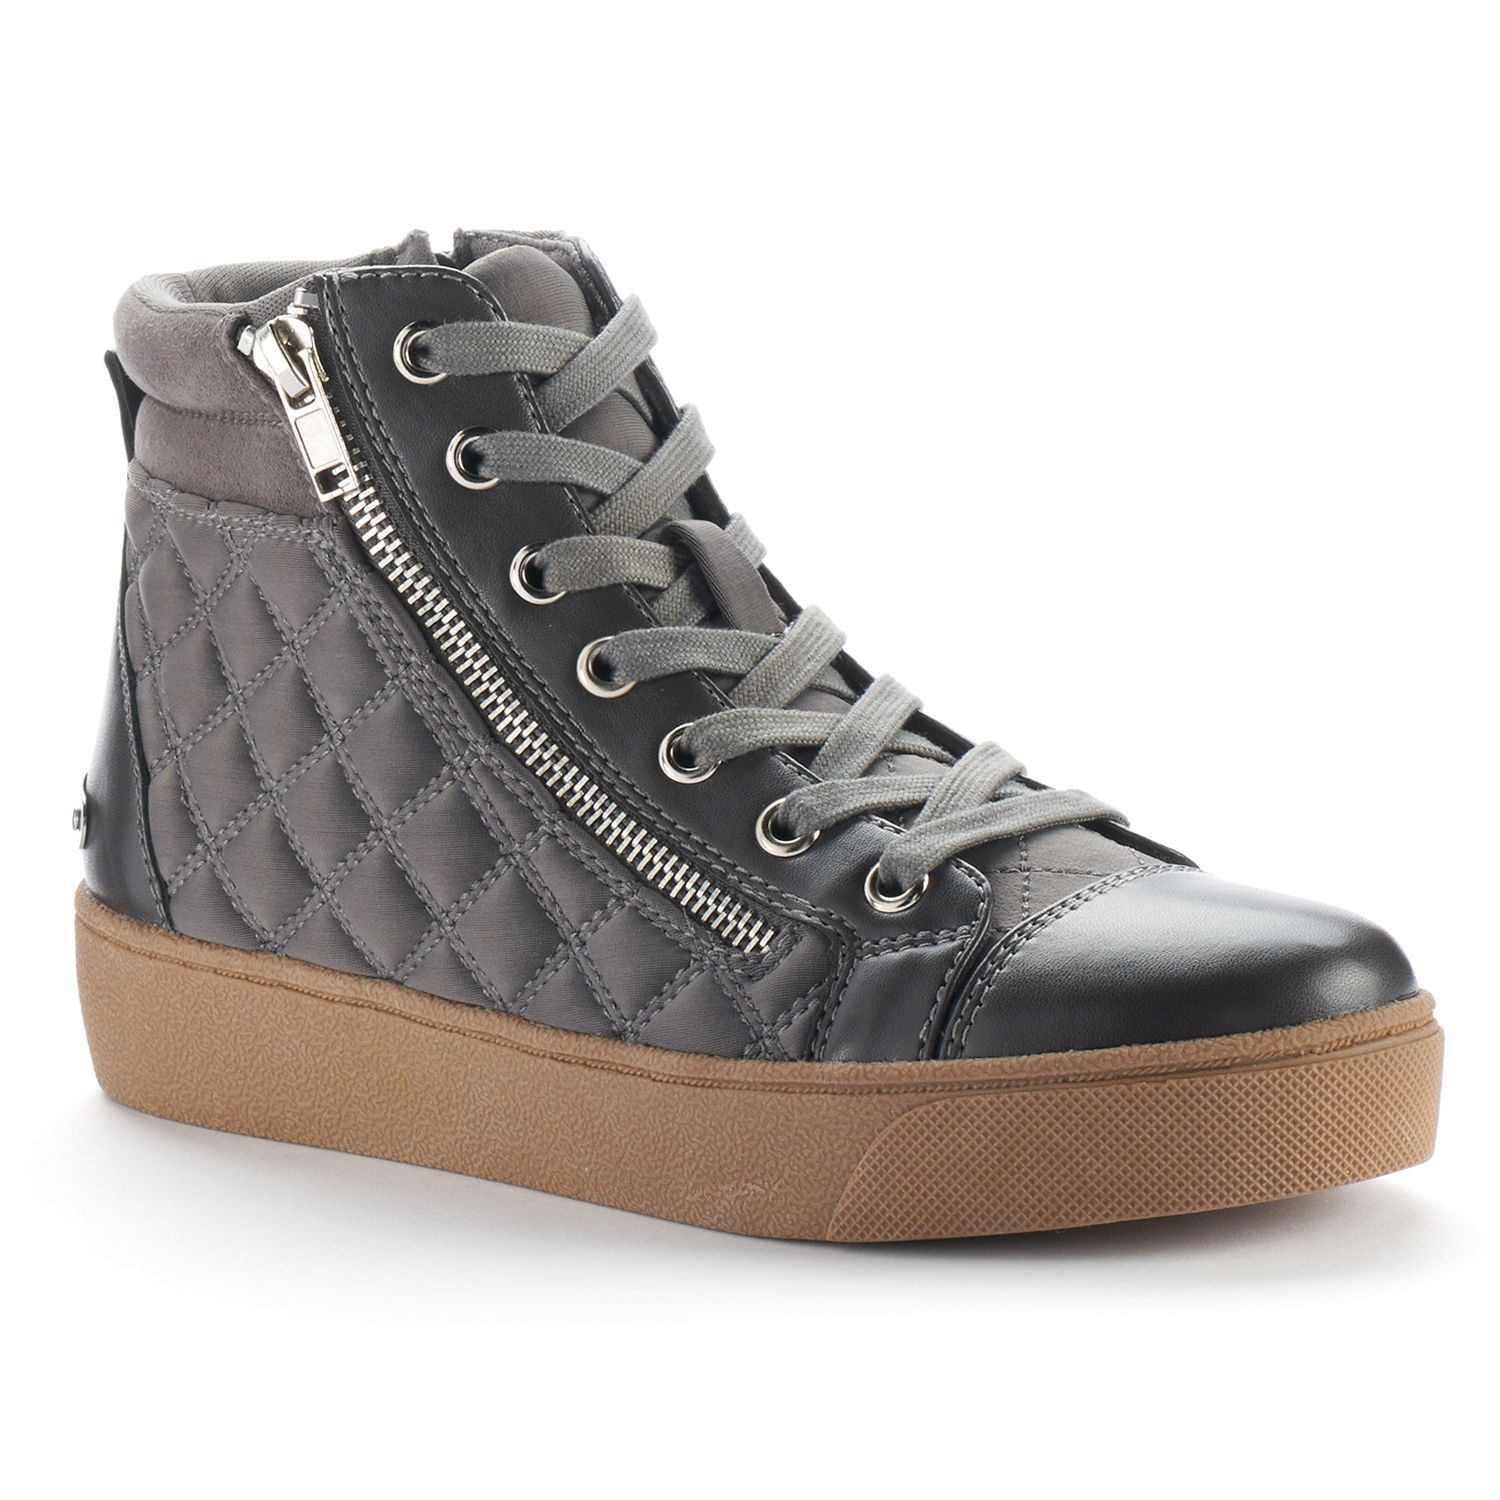 quilted high top sneakers